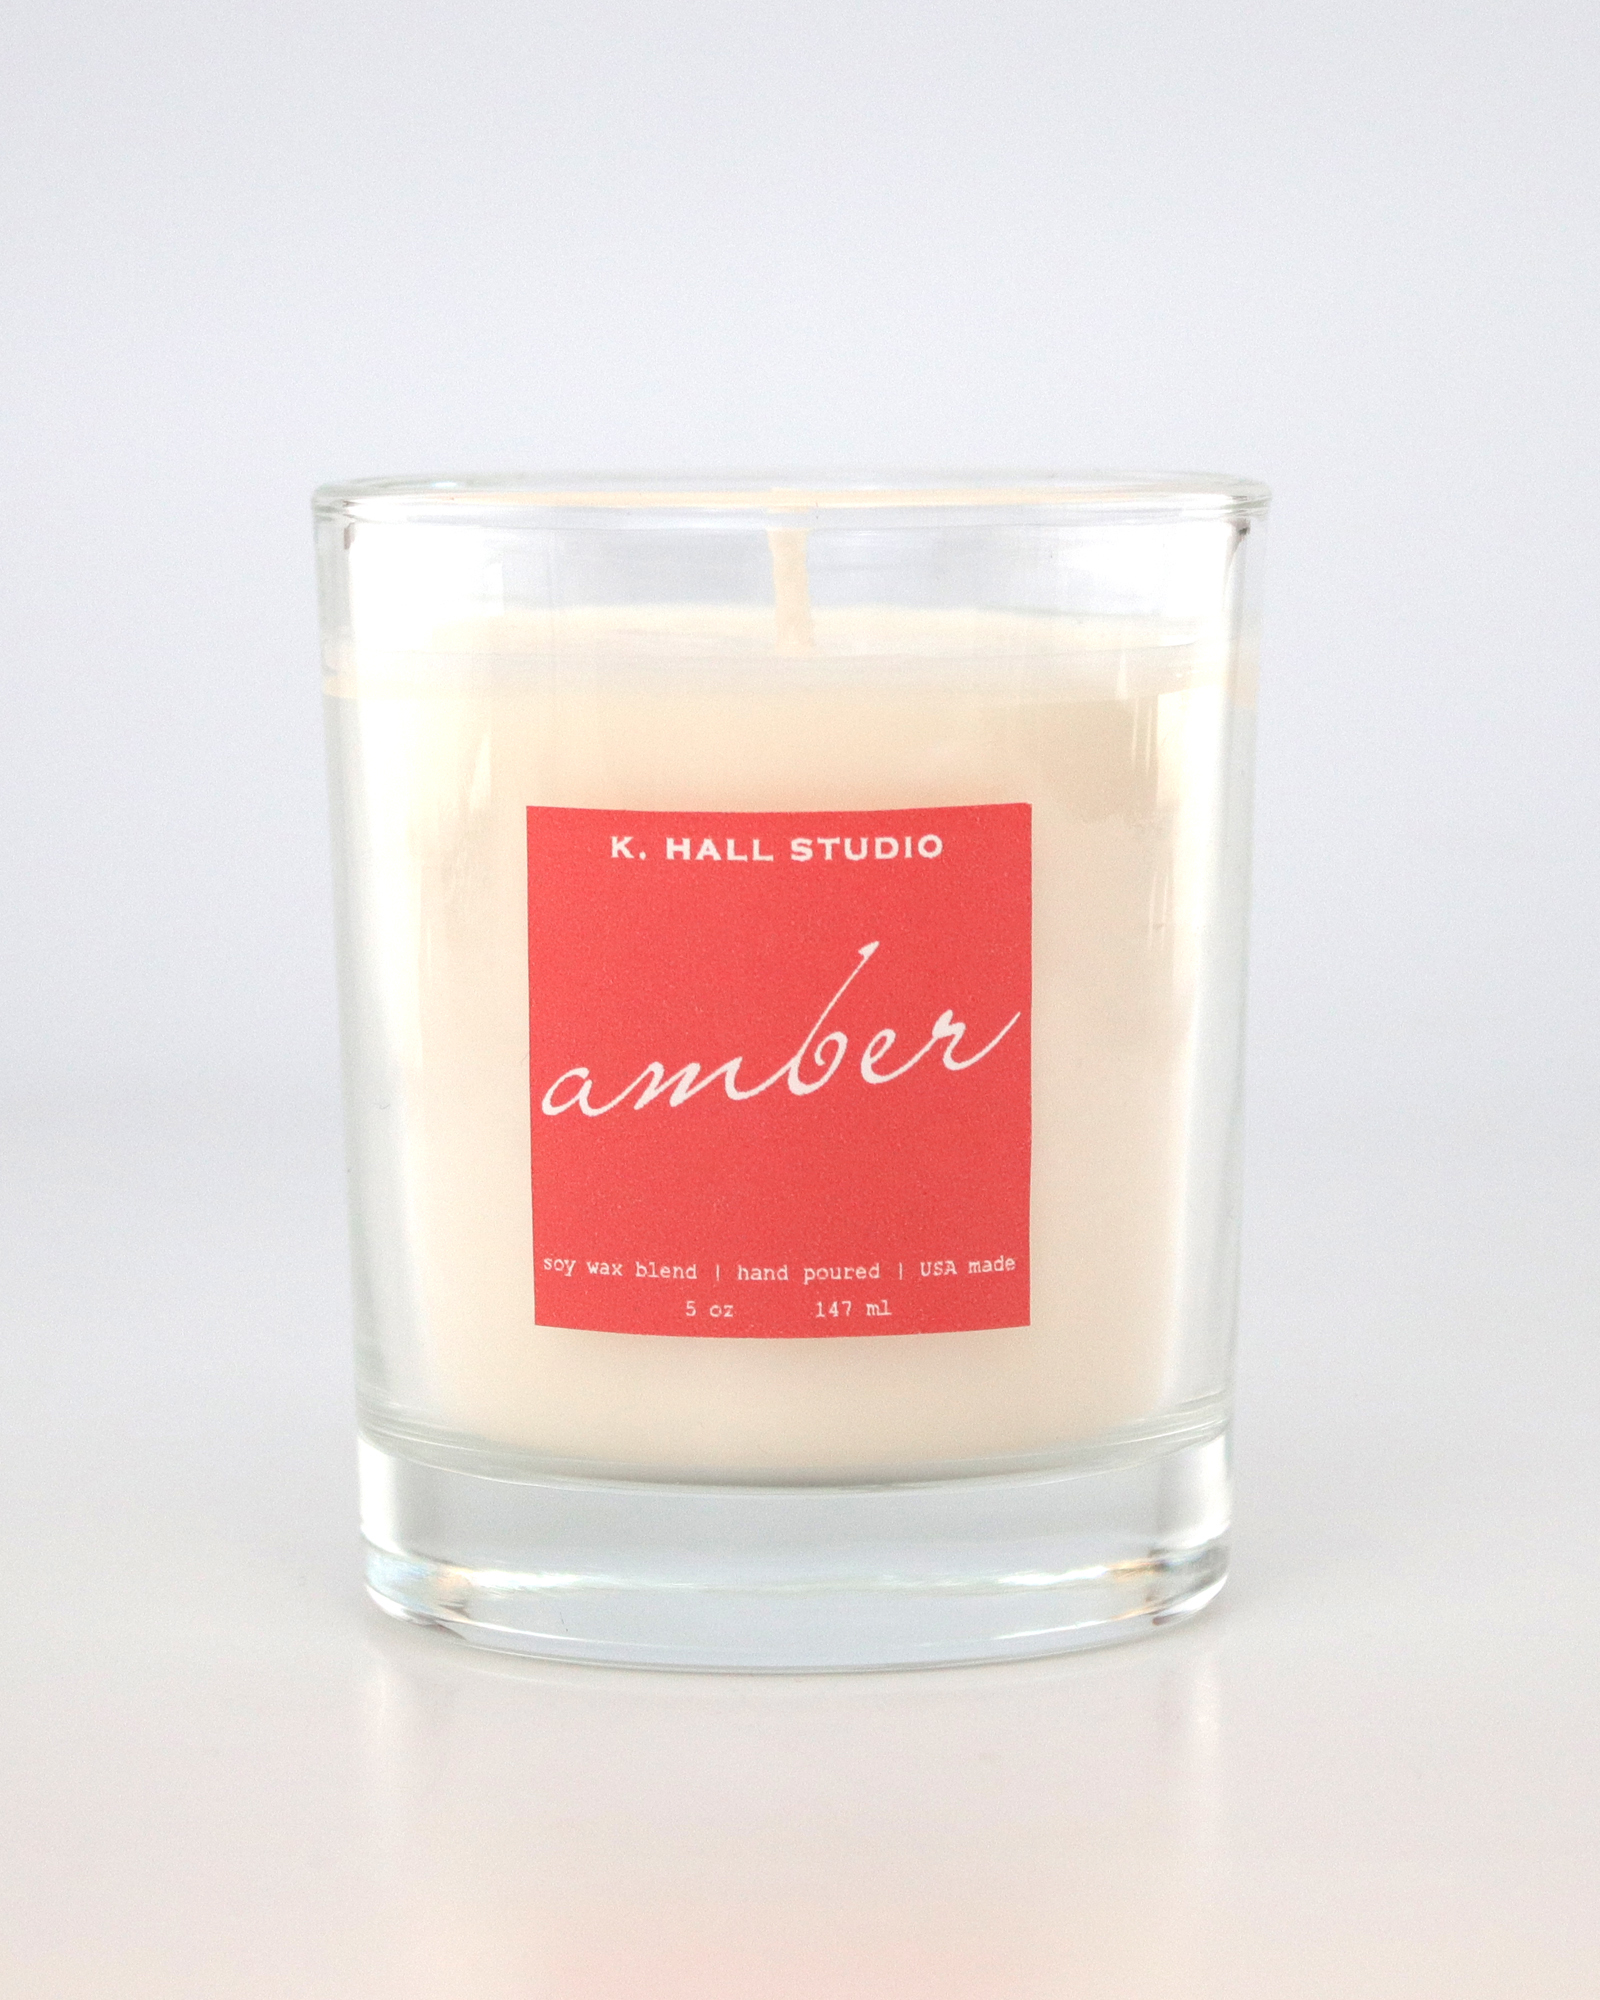 Artisan candle with pink label